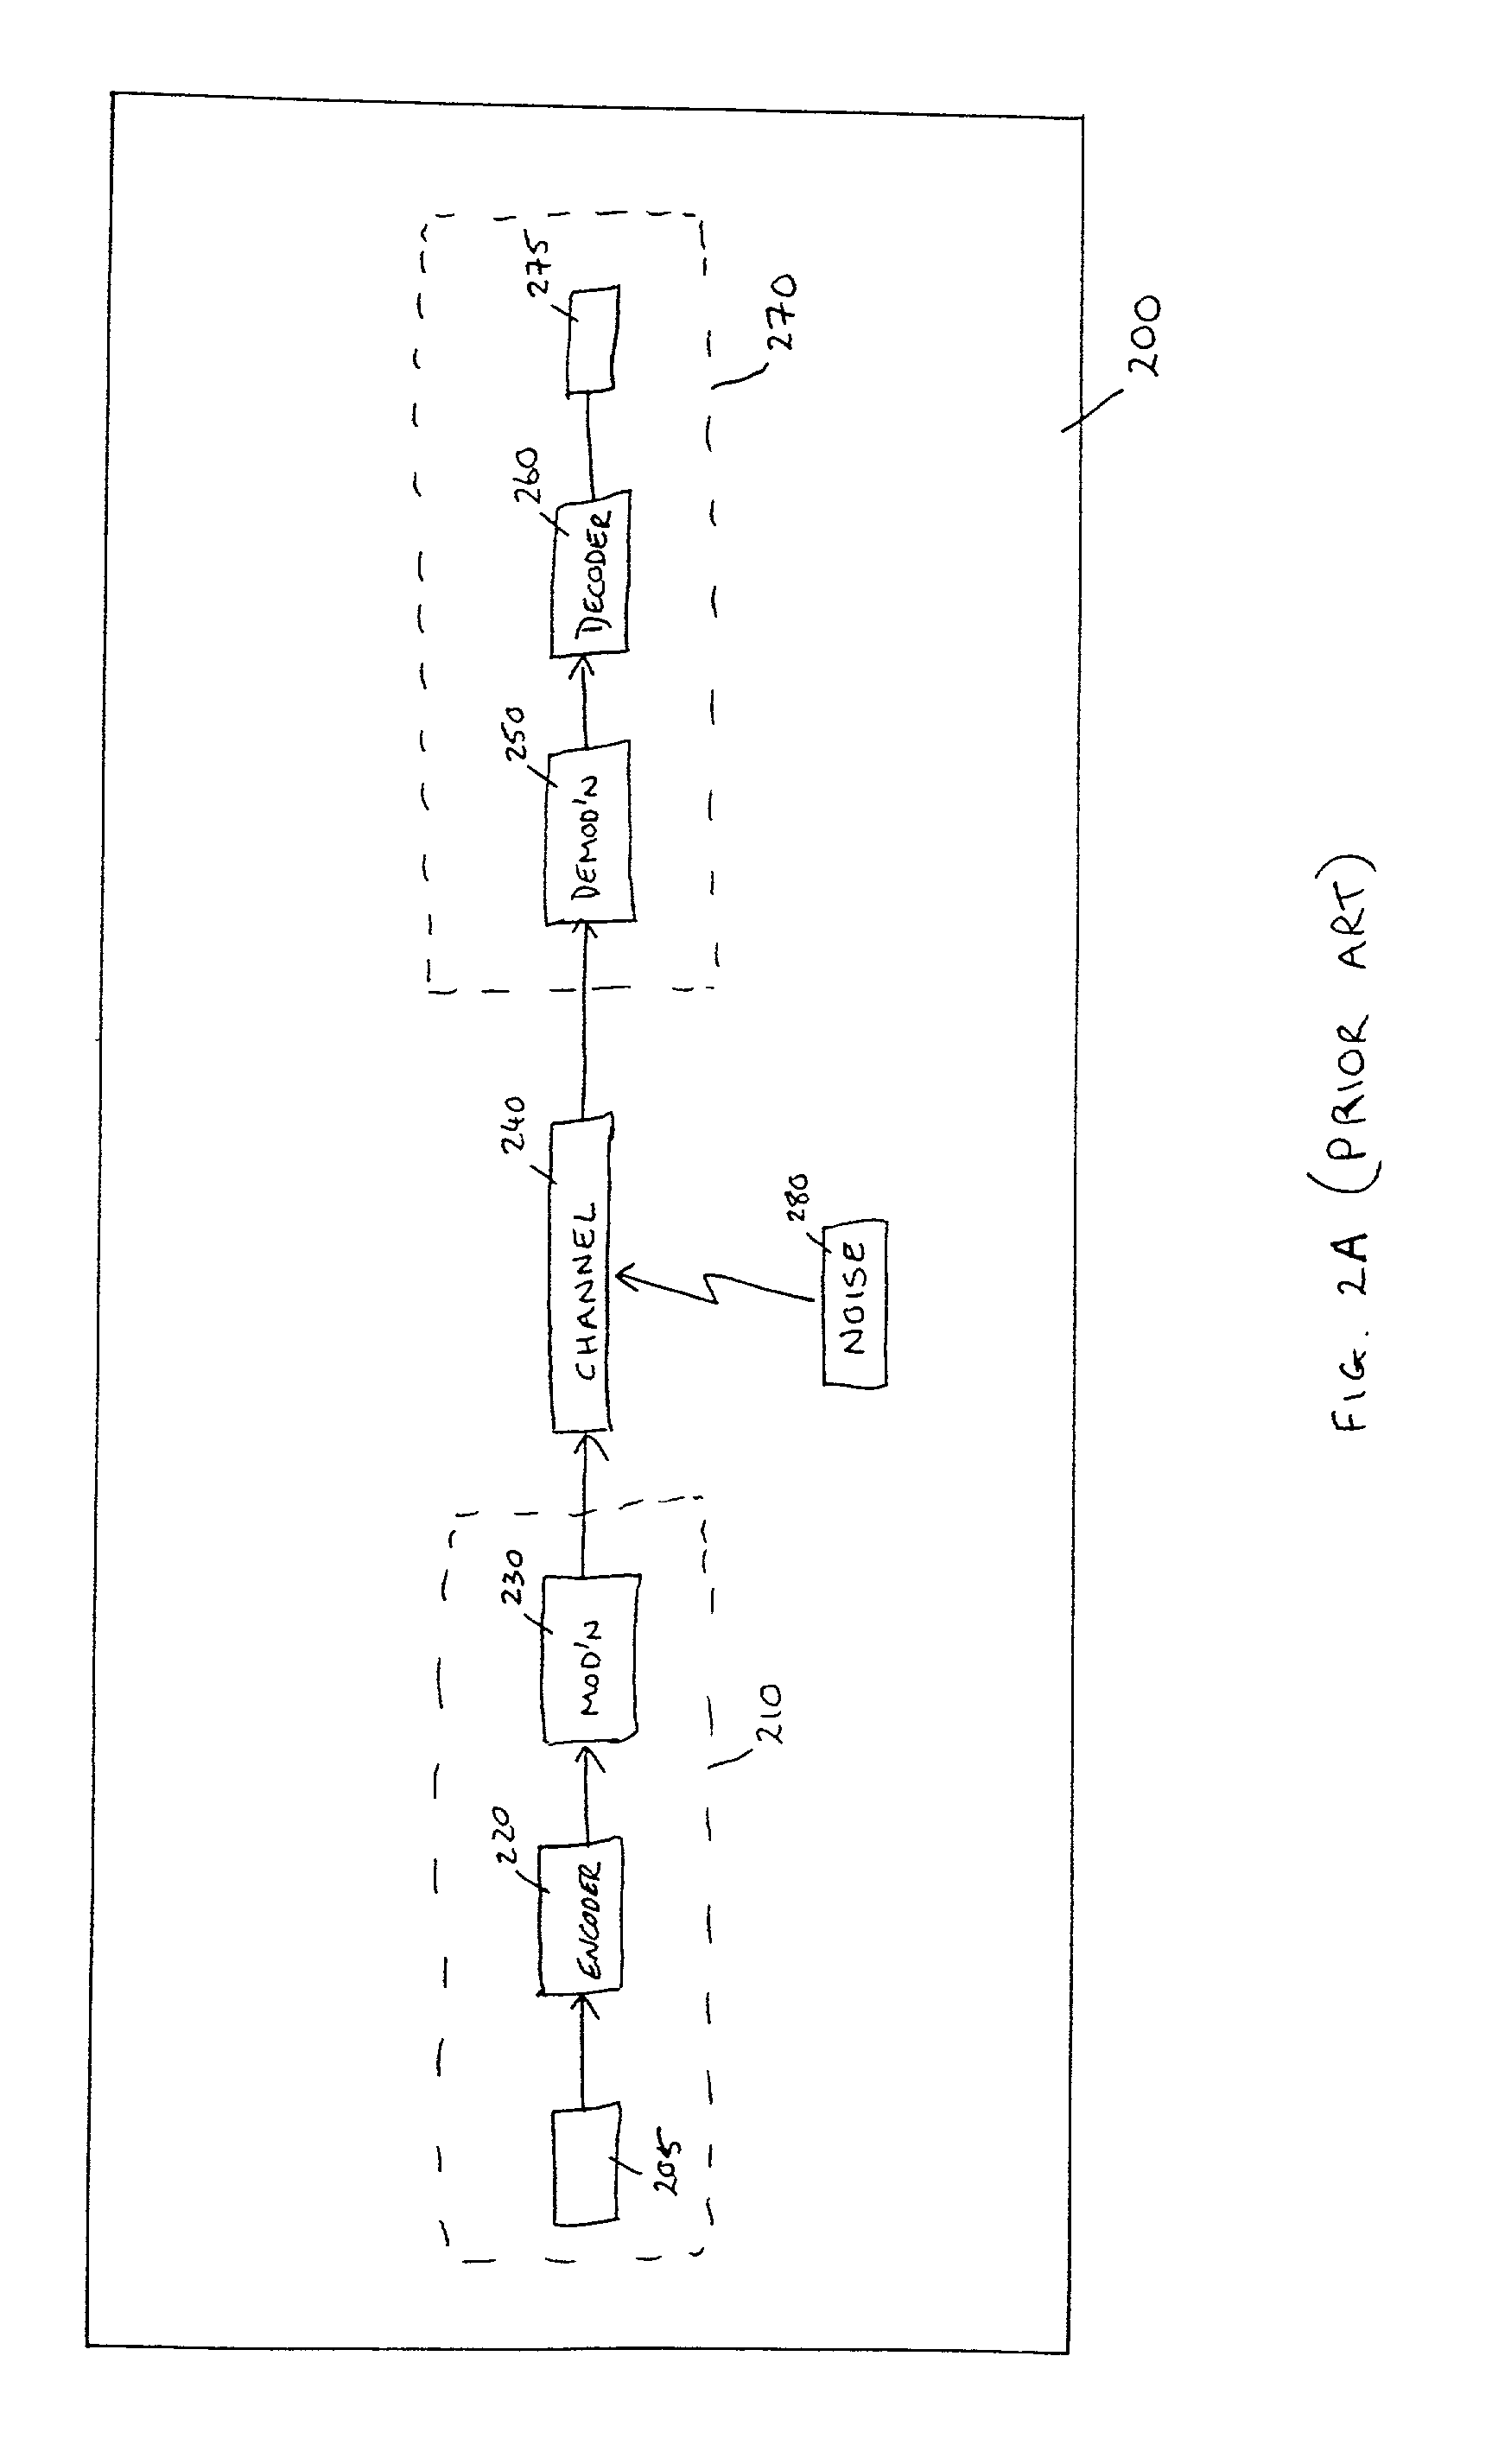 Architecture for a communications device